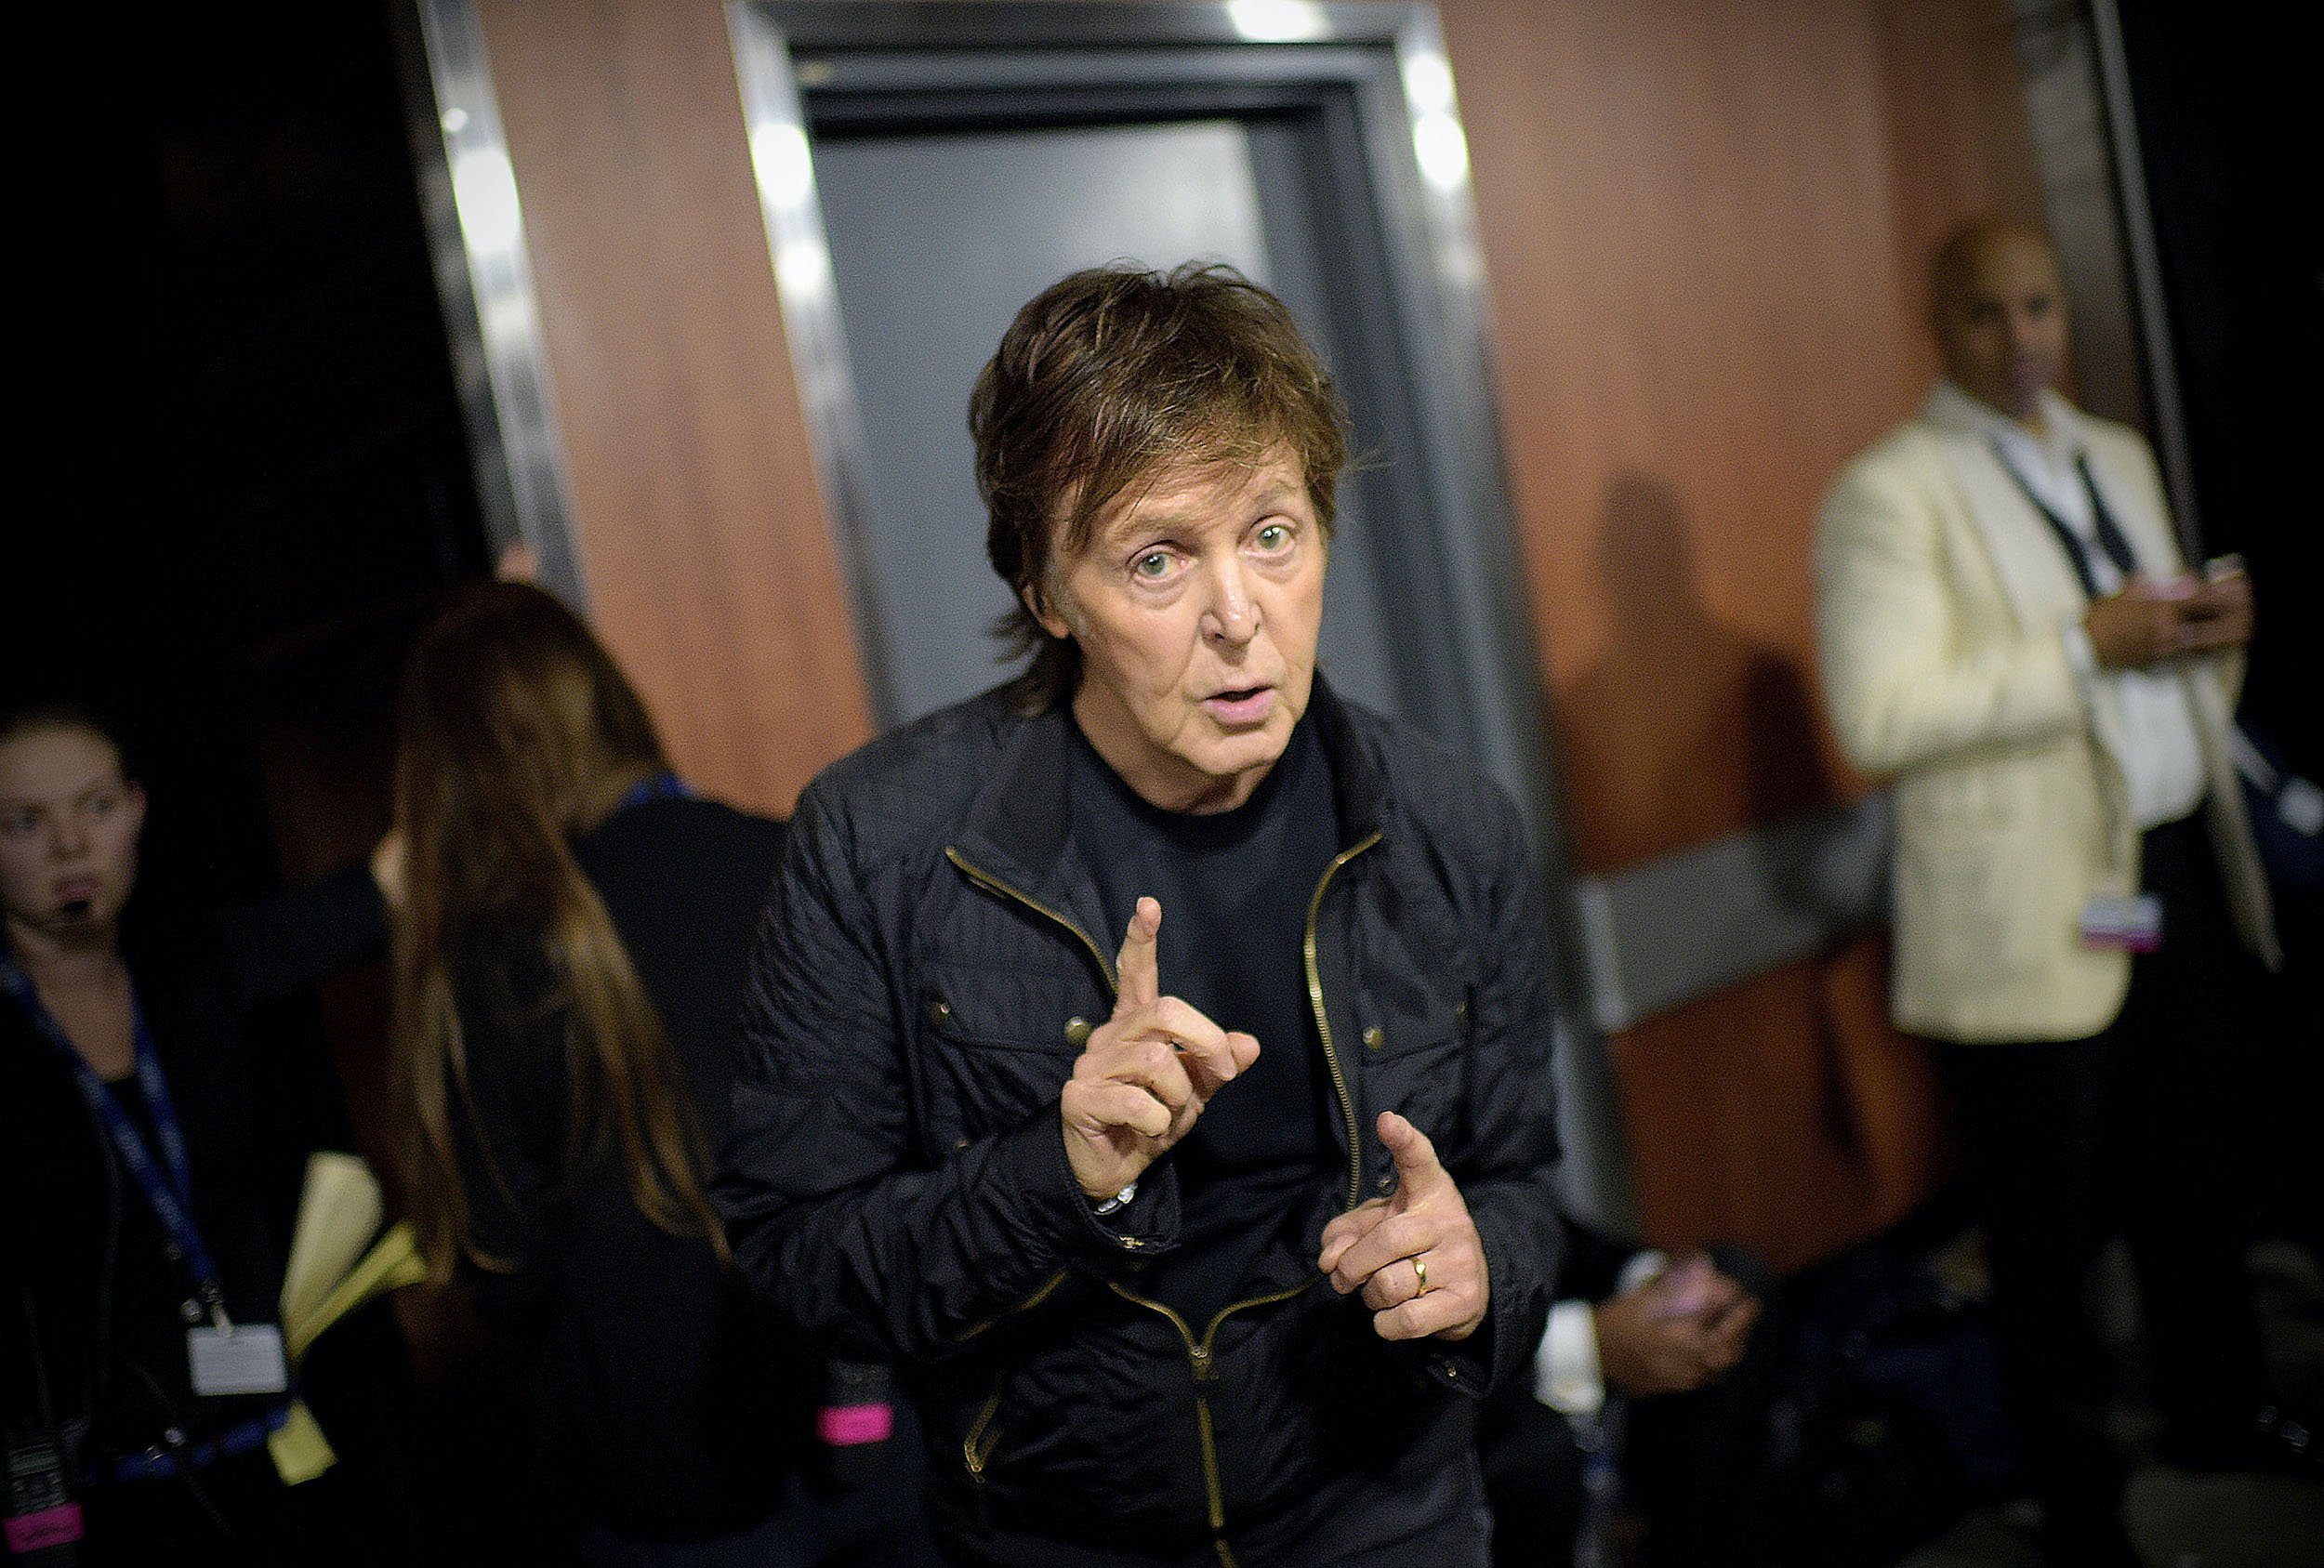 Paul McCartney attends the 57th annual Grammy Awards